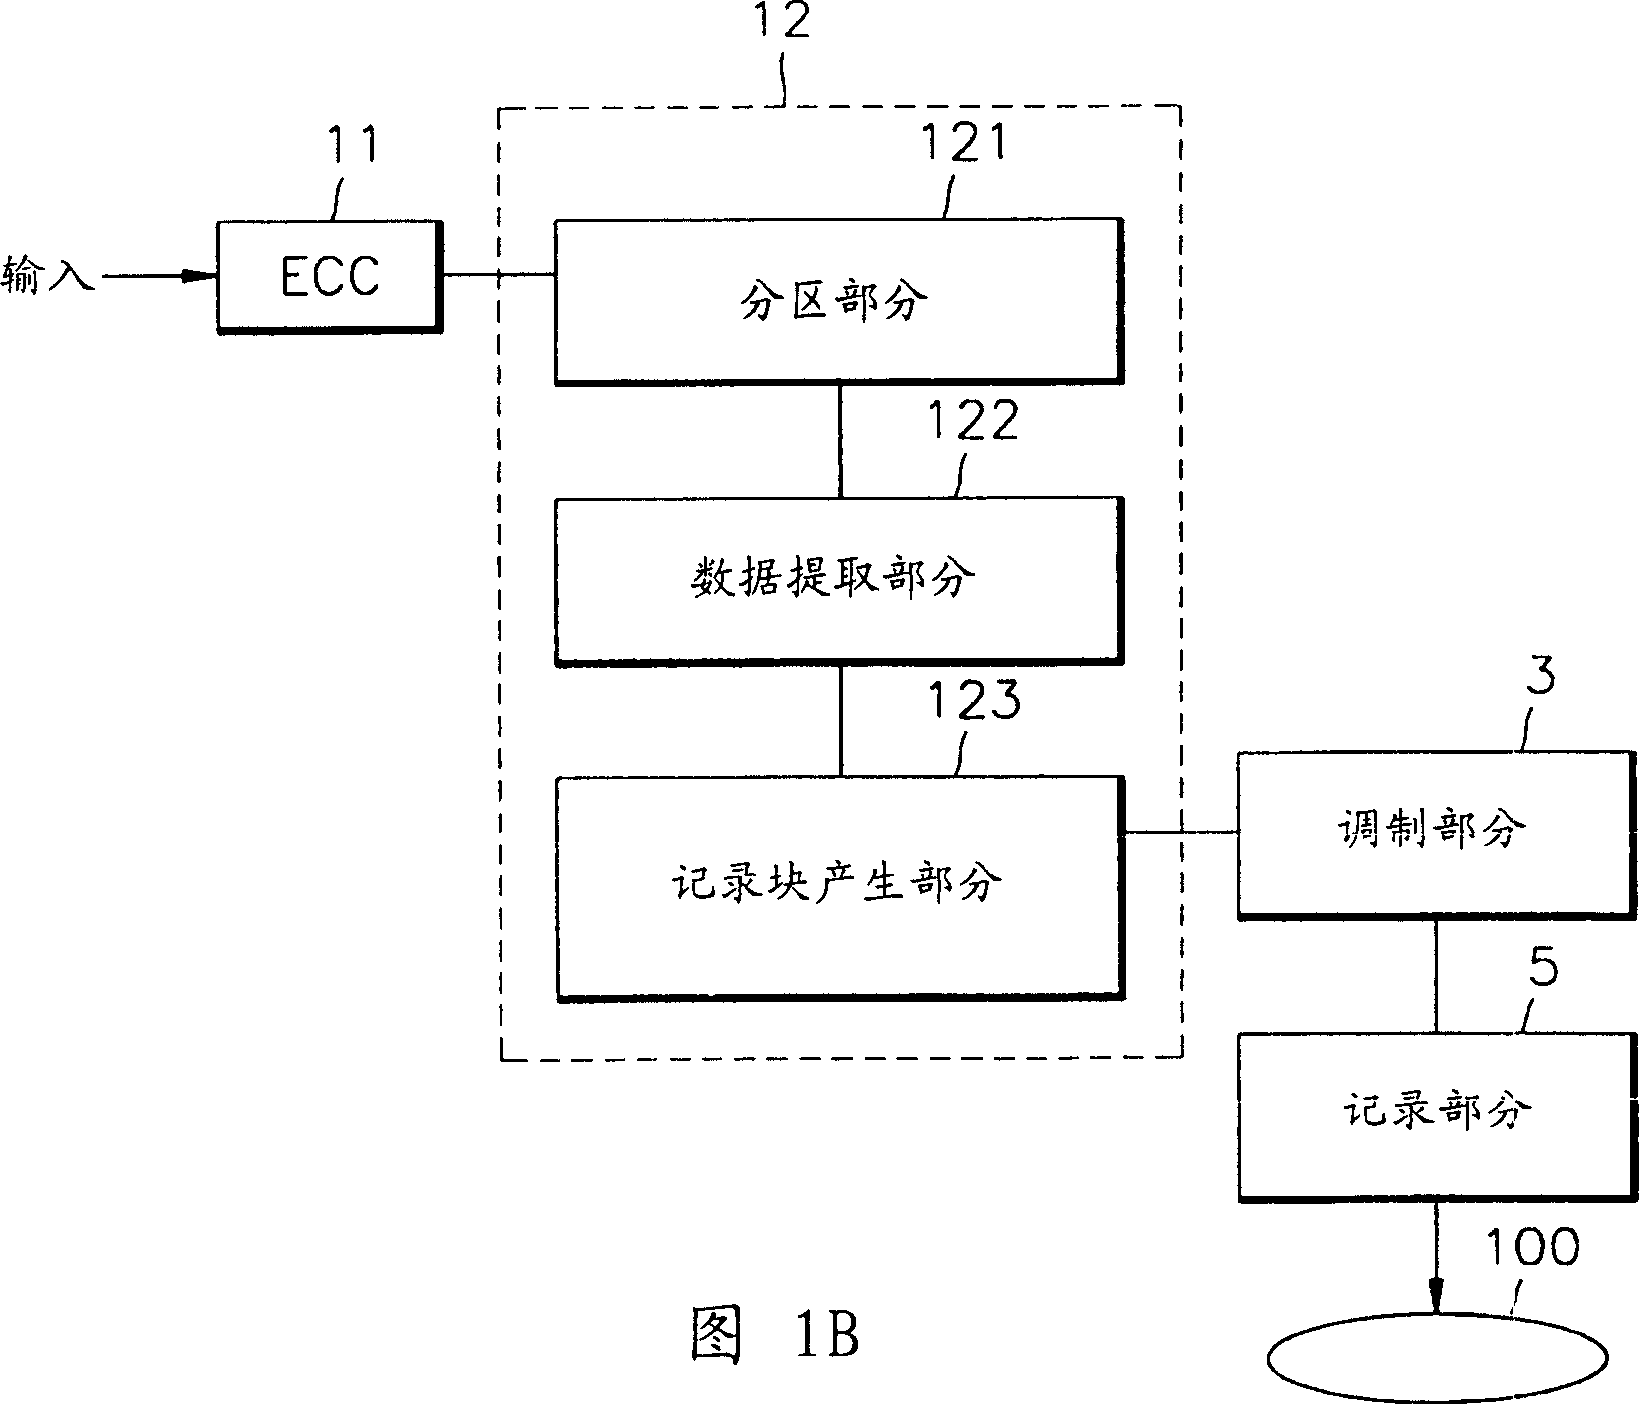 Optical recording device, data recording method used by such device